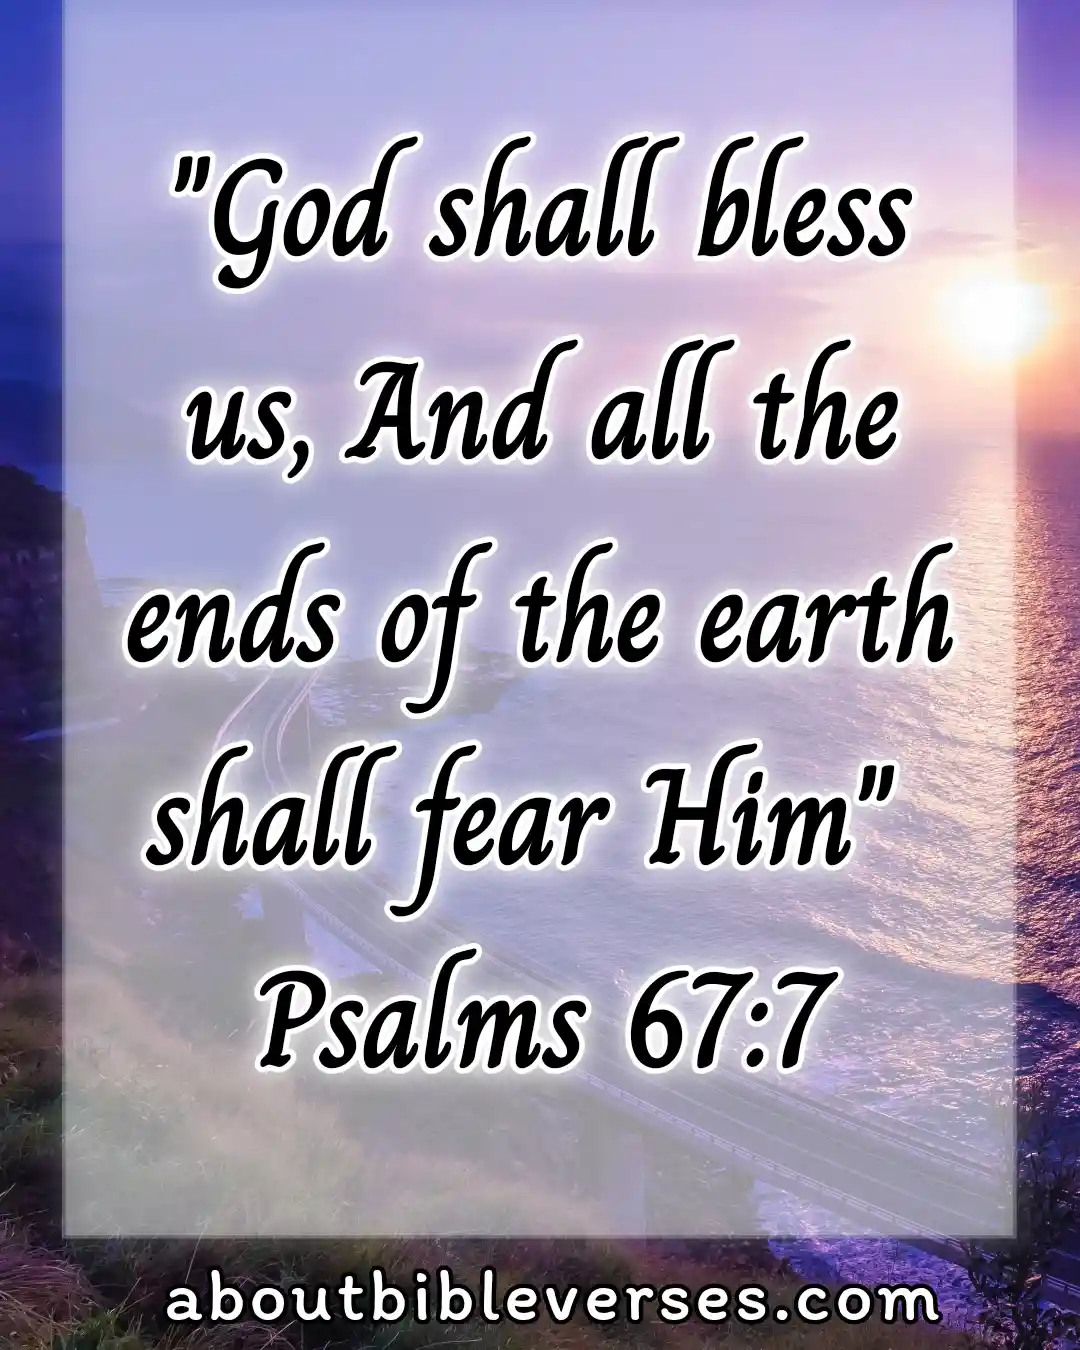 today bible verse (Psalm 67:7)